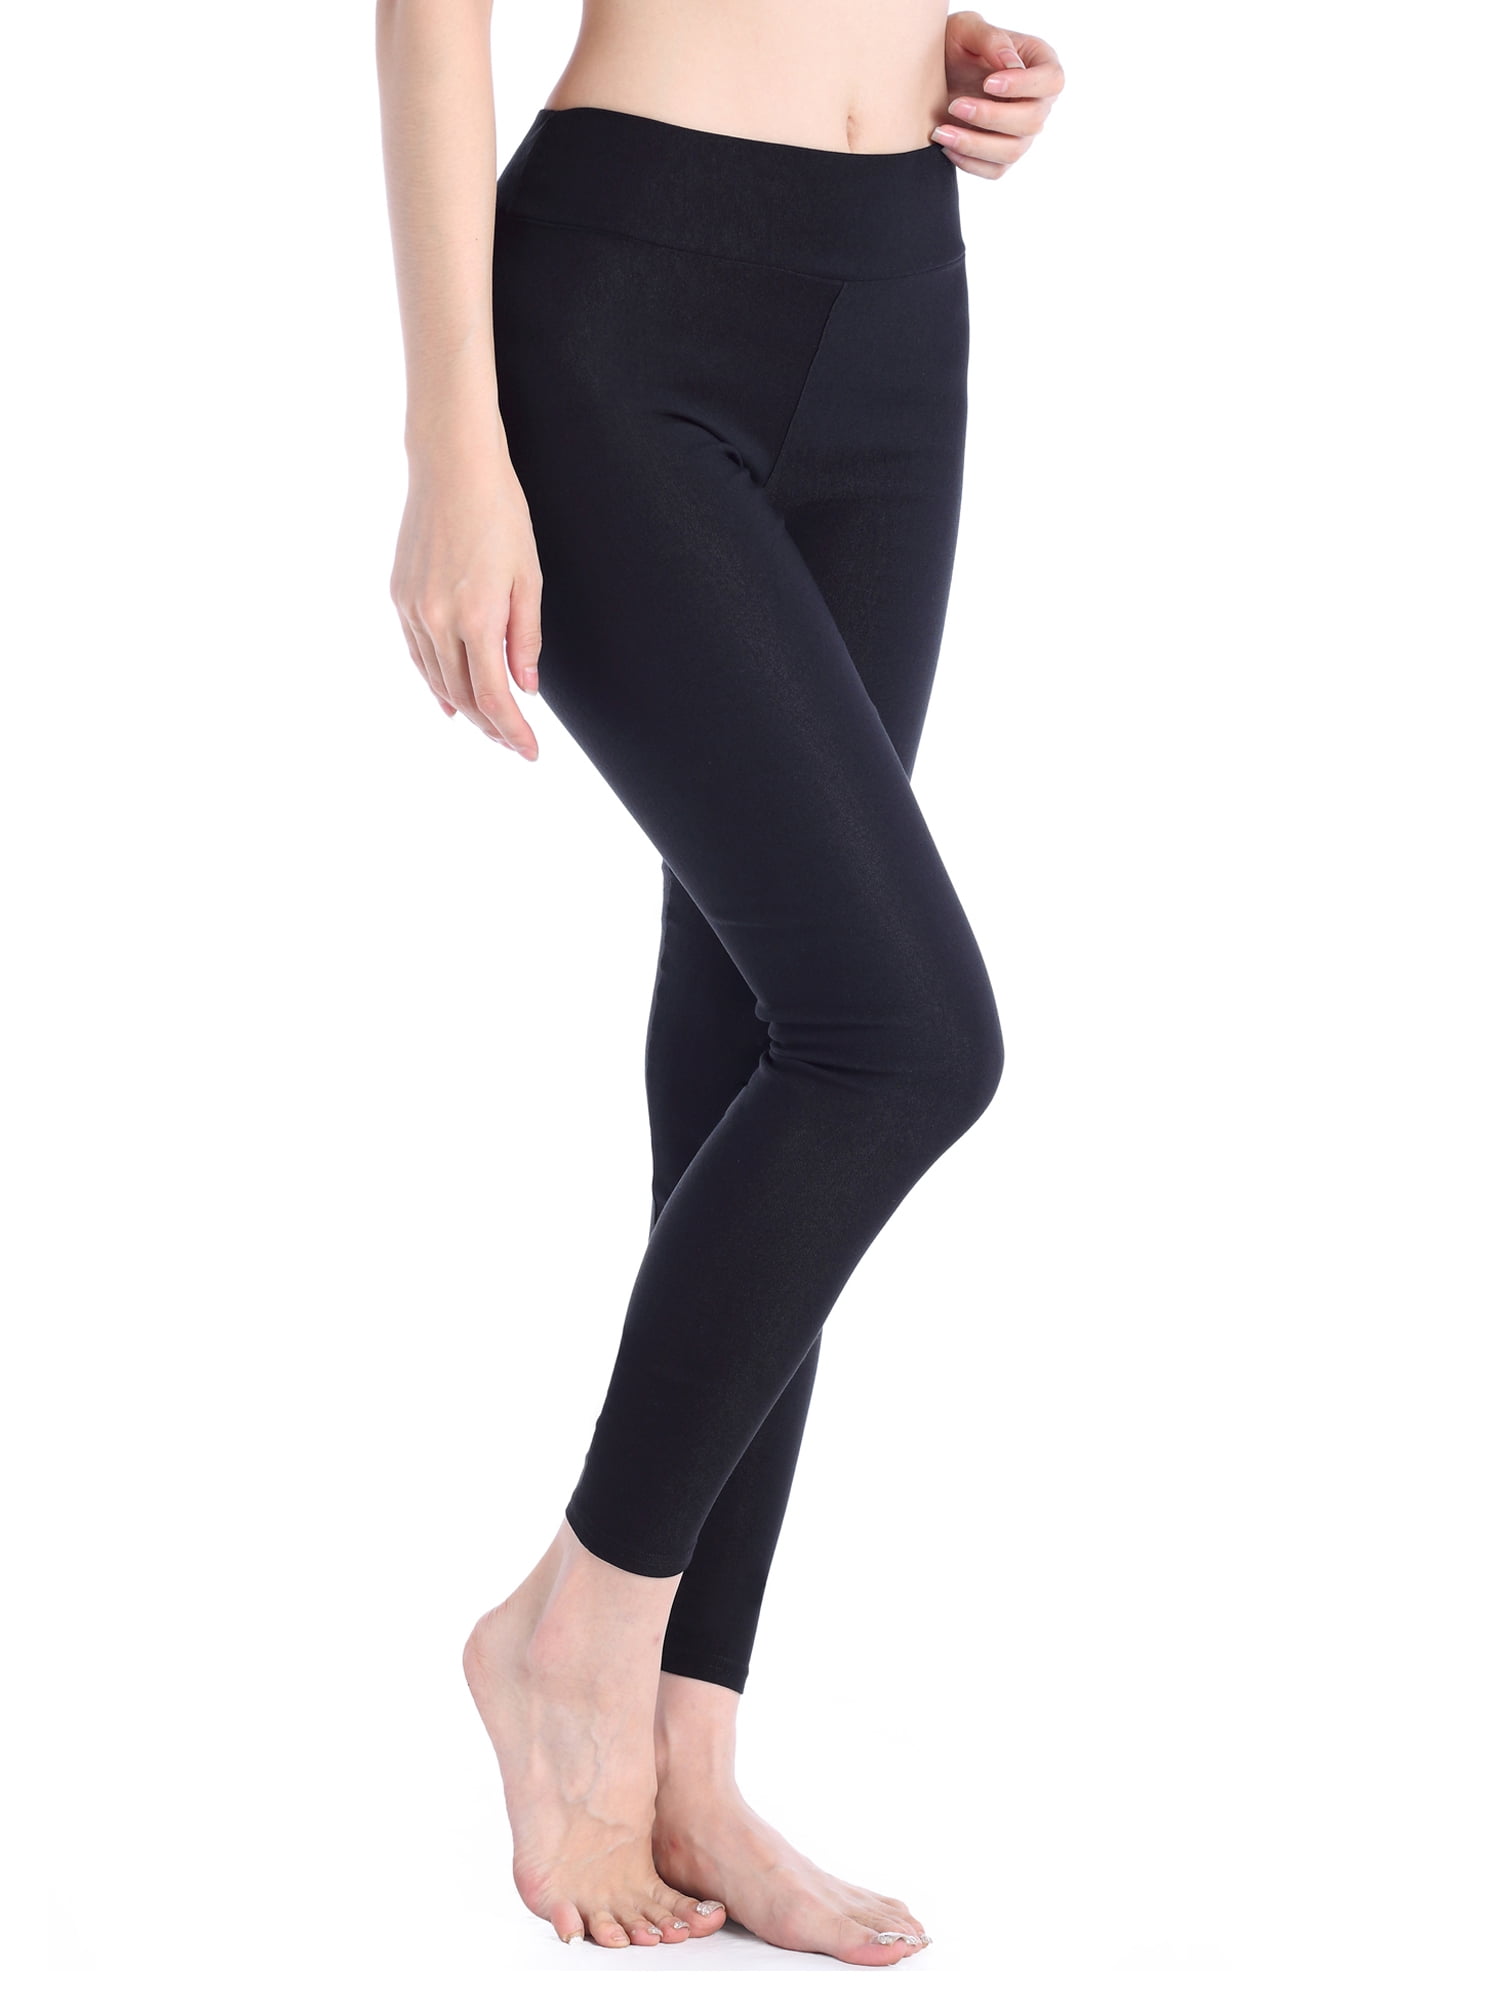 Youloveit Women's Plus Size Solid Color Seamless Leggings Fitness Slim ...